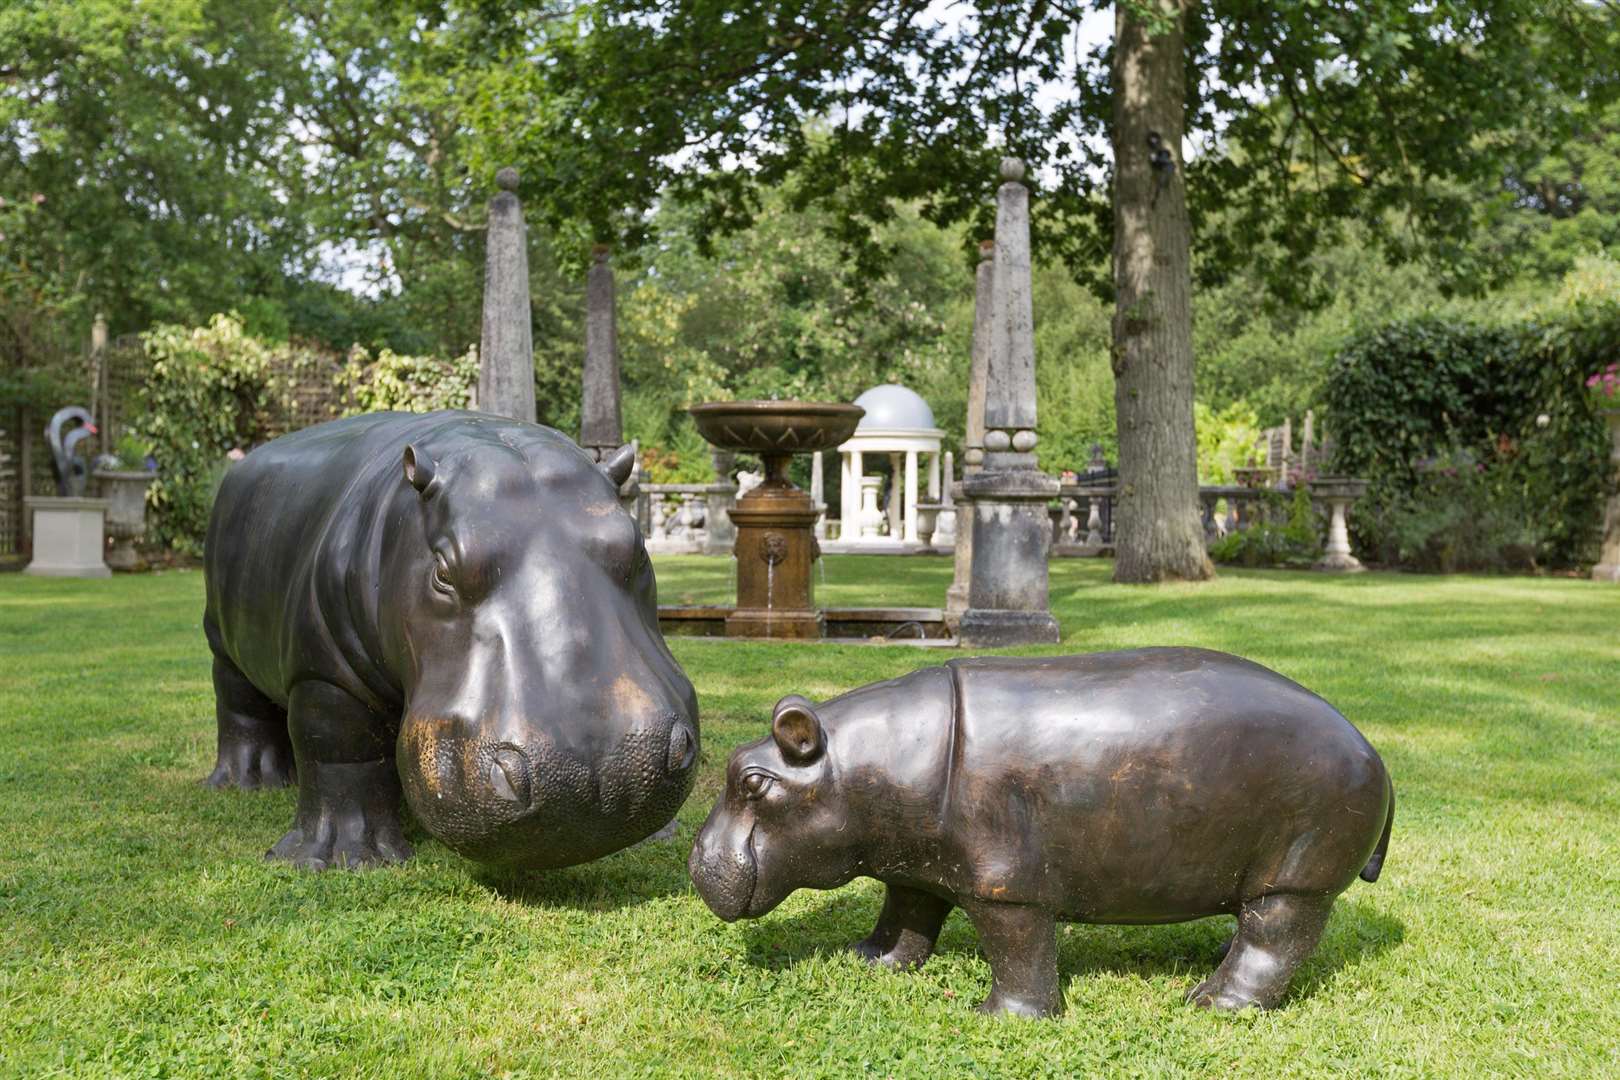 'Harry the Hippo' with 'Harry Jr', who was sold before the break-in